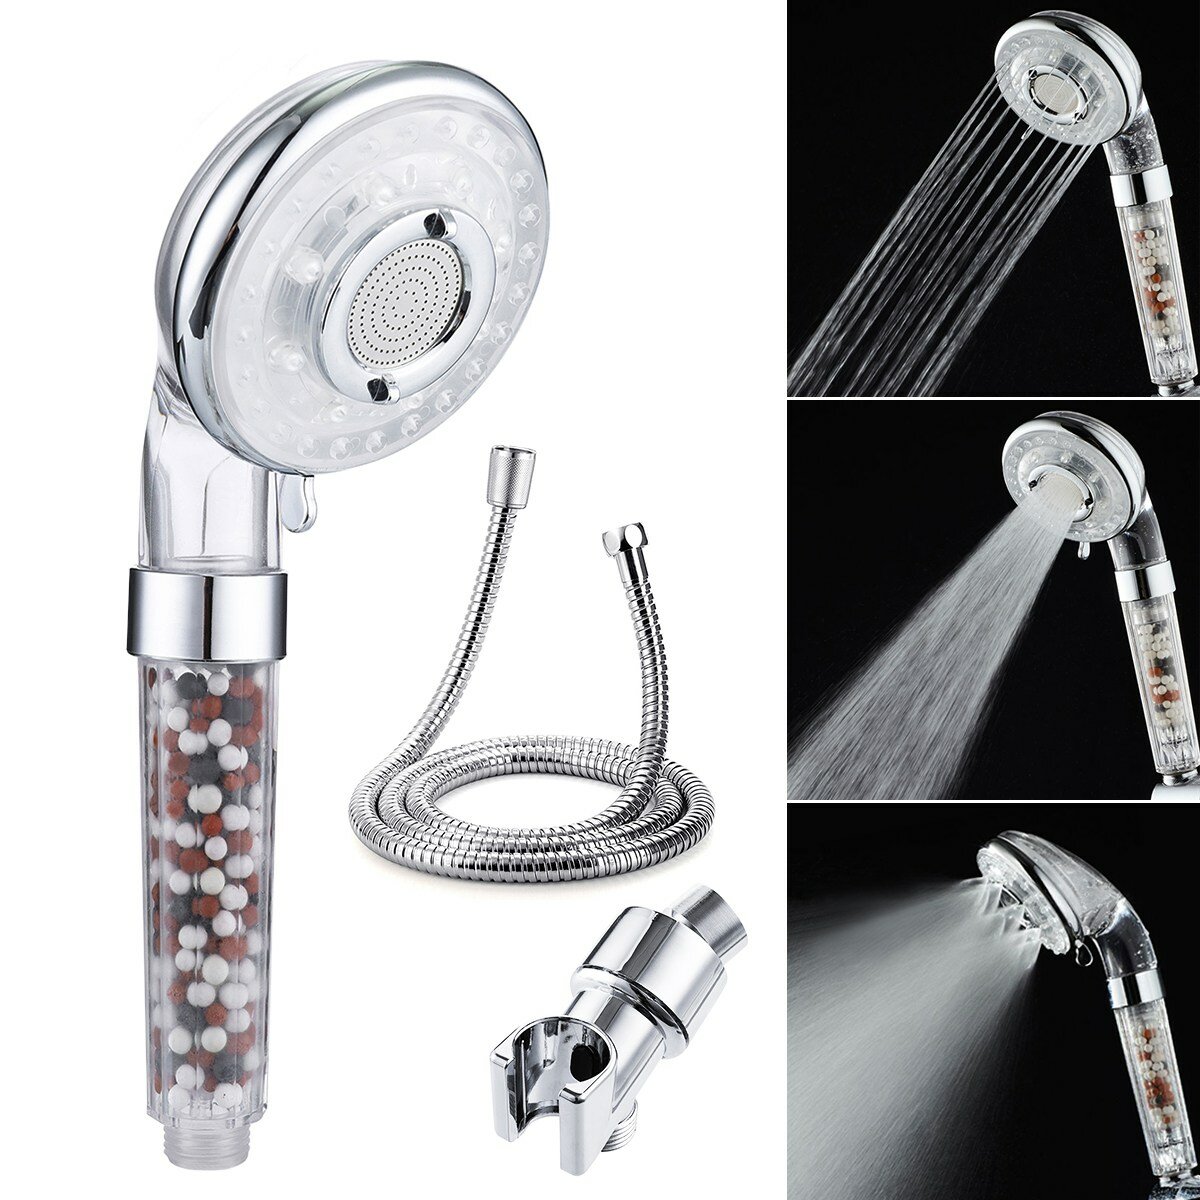 Baban Shower Head Filtration Hand Shower 3 Mode Shower With Limescale Filter And Ion Filter With A P